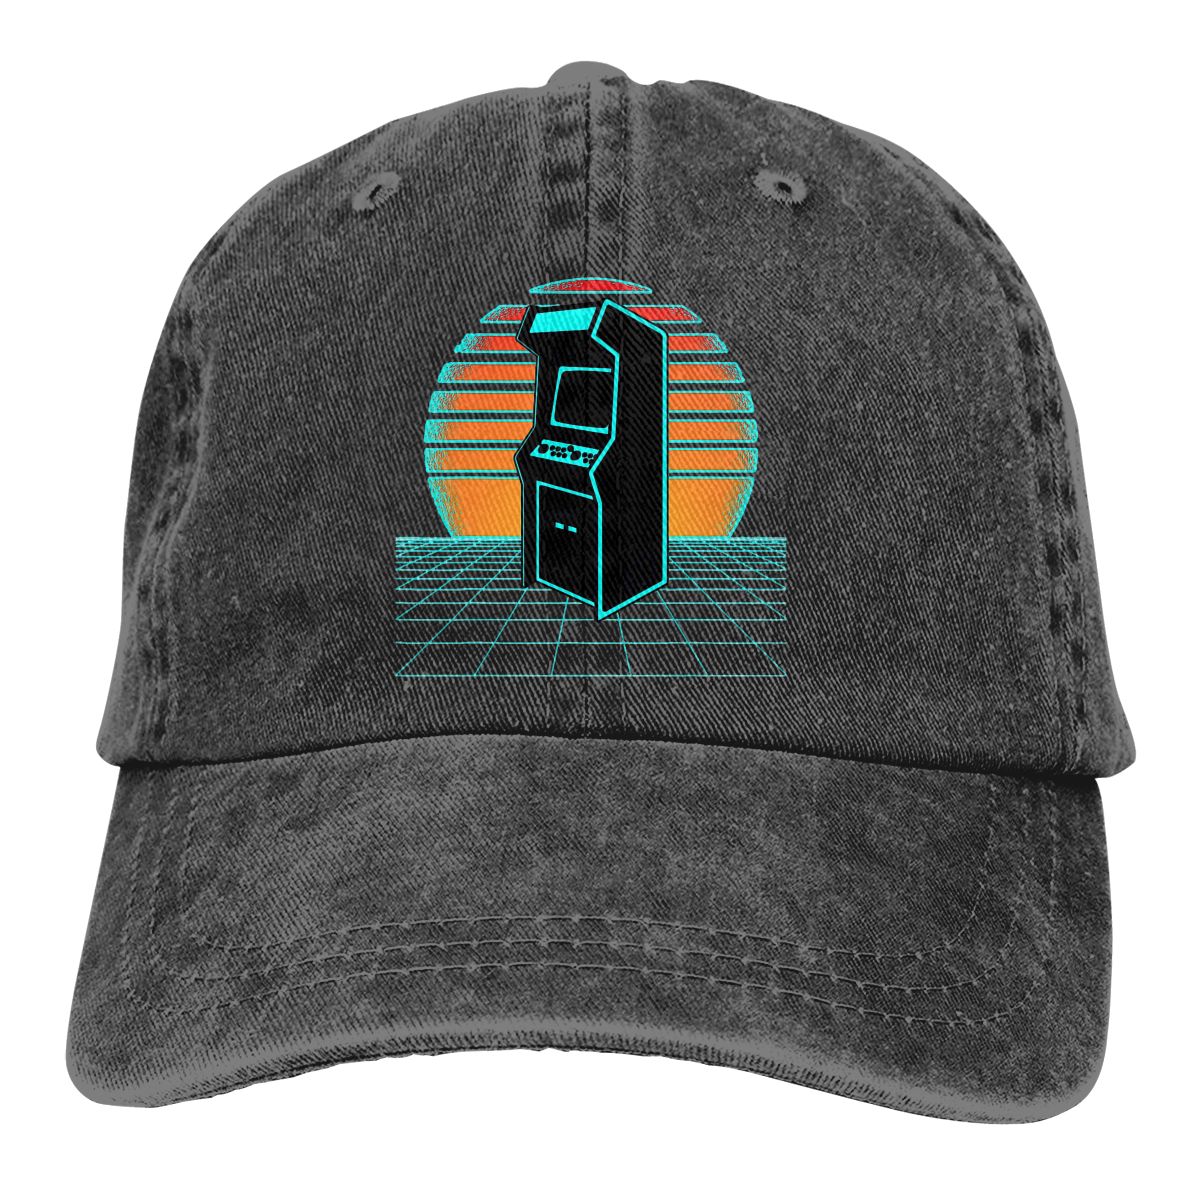 Aesthetic Video Gaming - 80s Arcade Game - Snapback Baseball Cap - Summer Hat For Men and Women-Black-One Size-